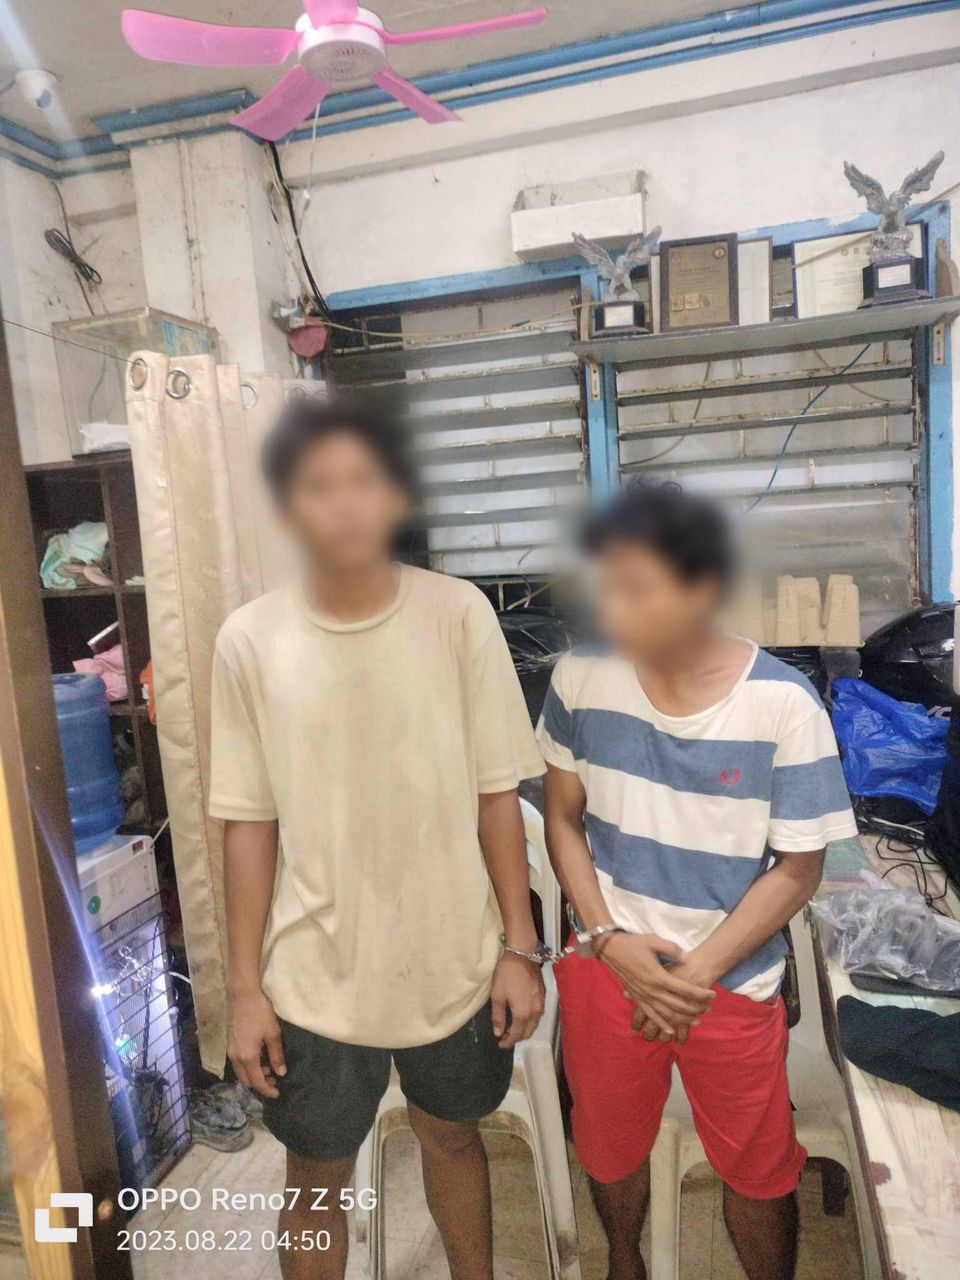 Mambaling police: 2 men nabbed for stealing motorcycle allegedly to exchange for shabu